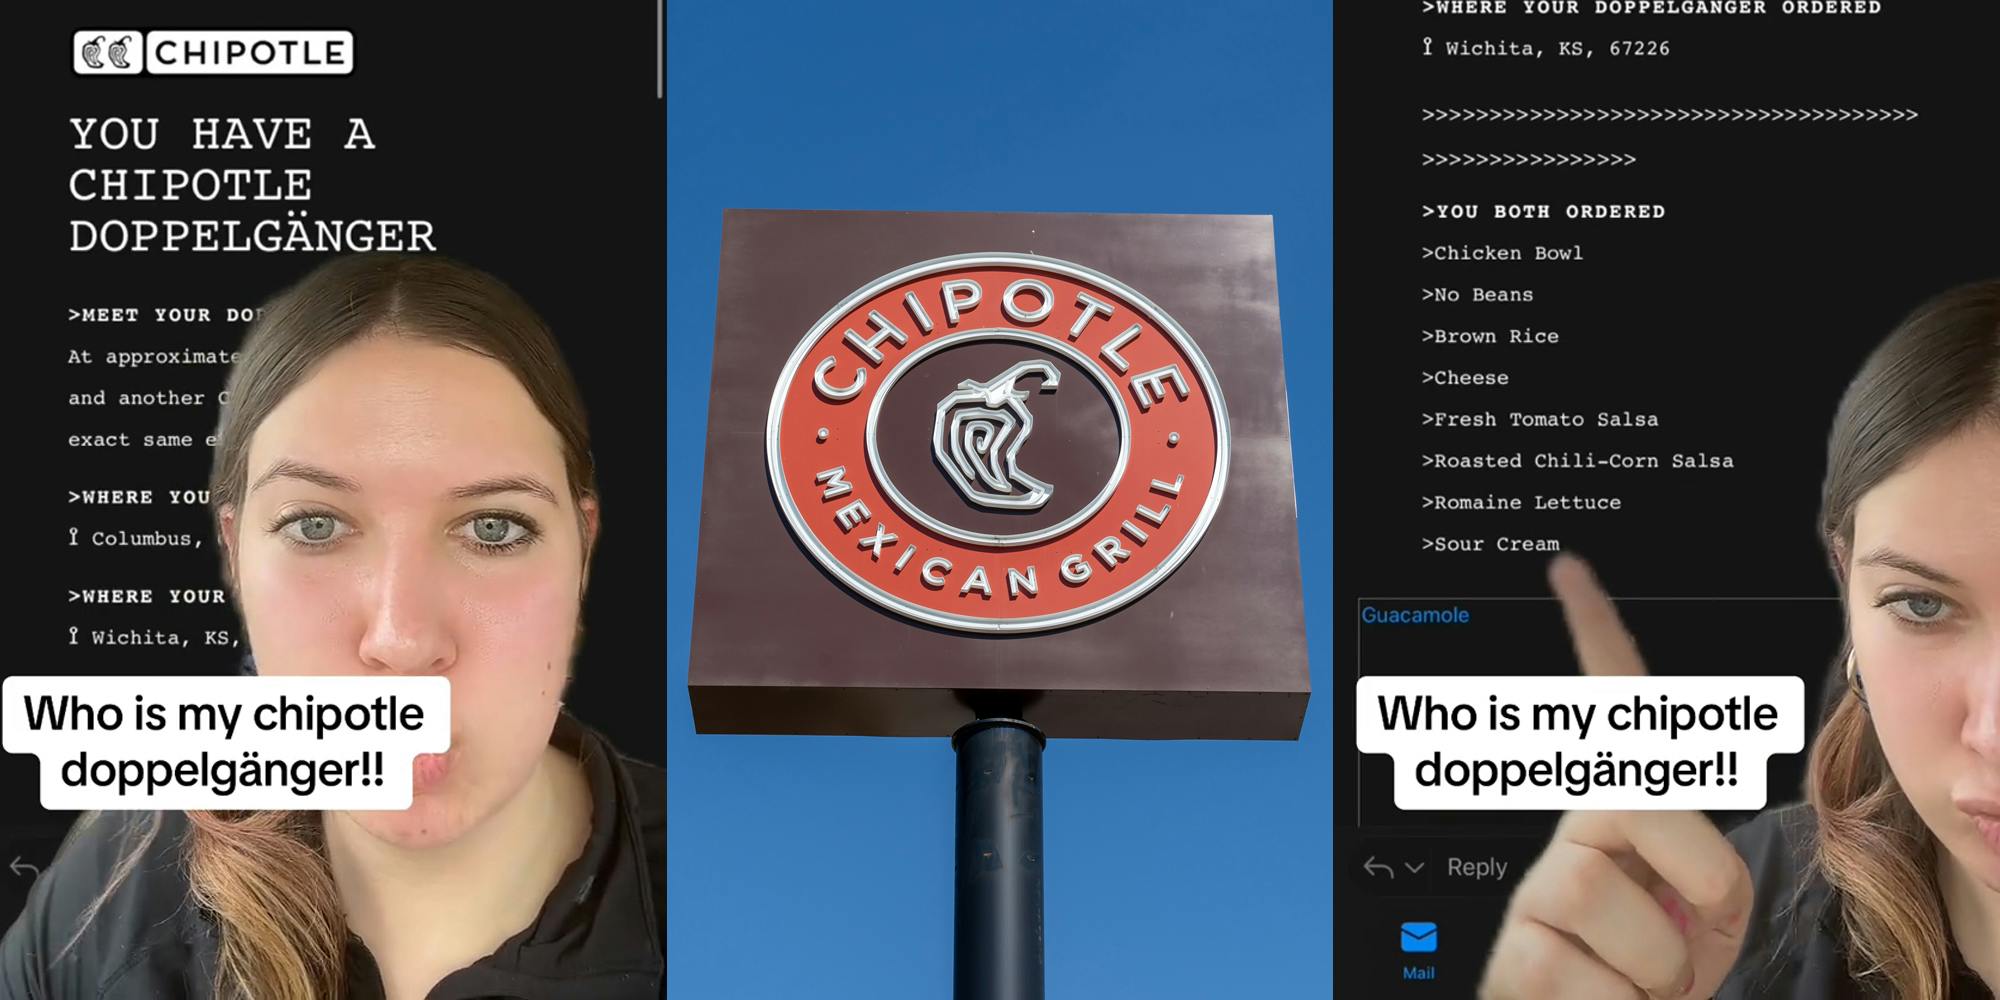 Chipotle customer greenscreen TikTok over Chipotle YOU HAVE A CHIPOTLE DOPPLEGANGER email with caption "Who is my chipotle doppleganger" (l) Chipotle sign (c) Chipotle customer greenscreen TikTok over Chipotle YOU HAVE A CHIPOTLE DOPPLEGANGER email with caption "Who is my chipotle doppleganger" (r)